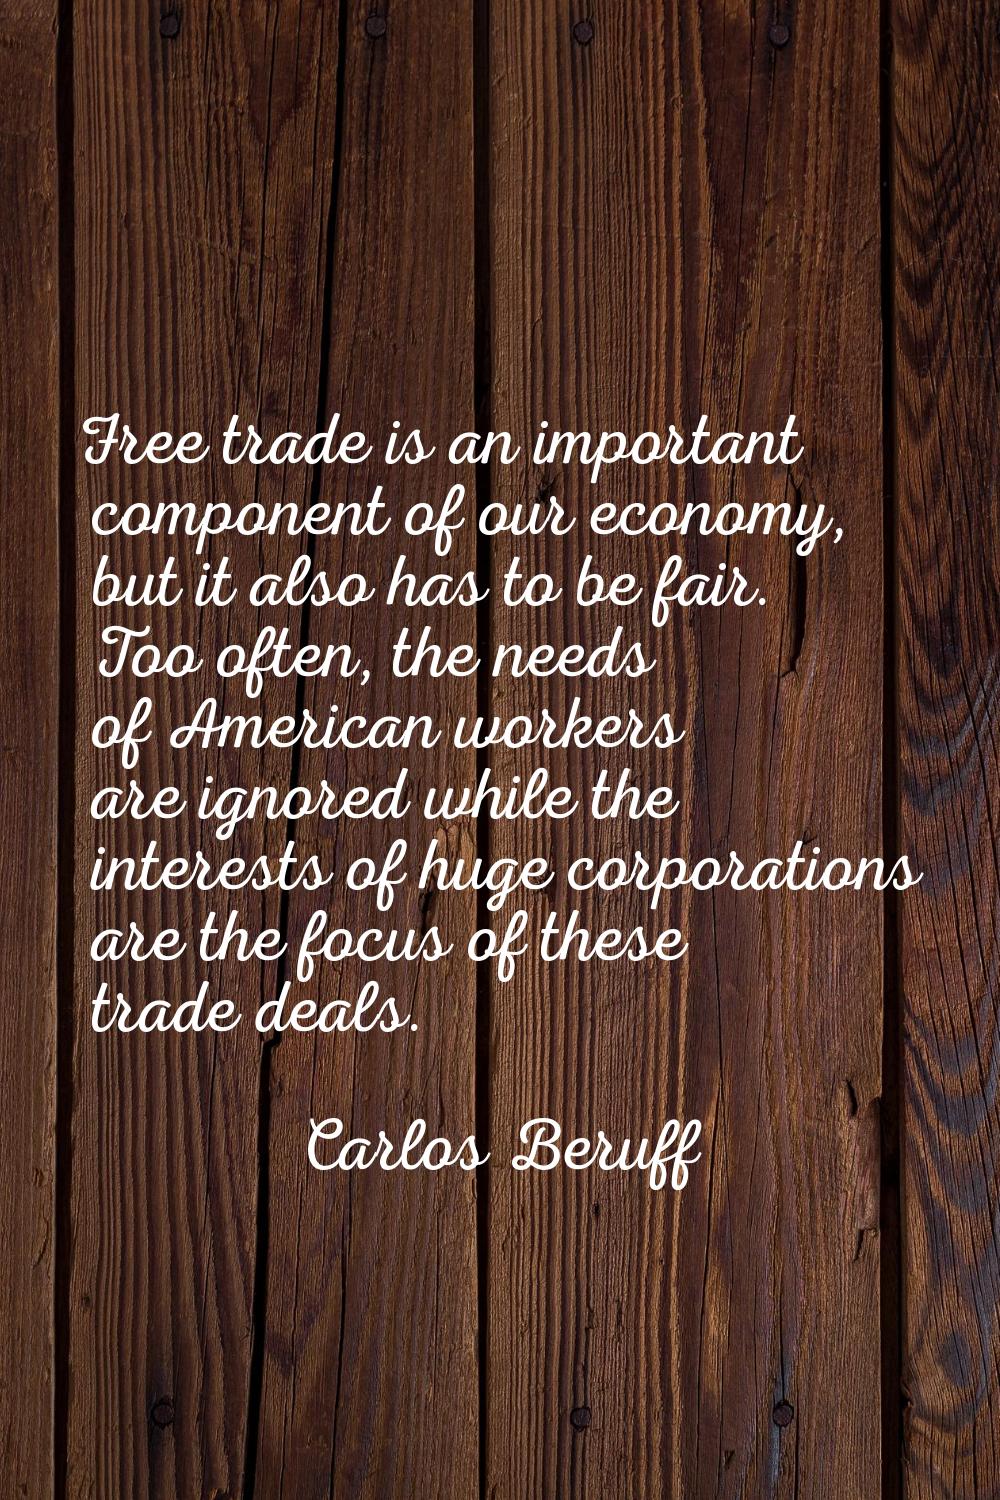 Free trade is an important component of our economy, but it also has to be fair. Too often, the nee